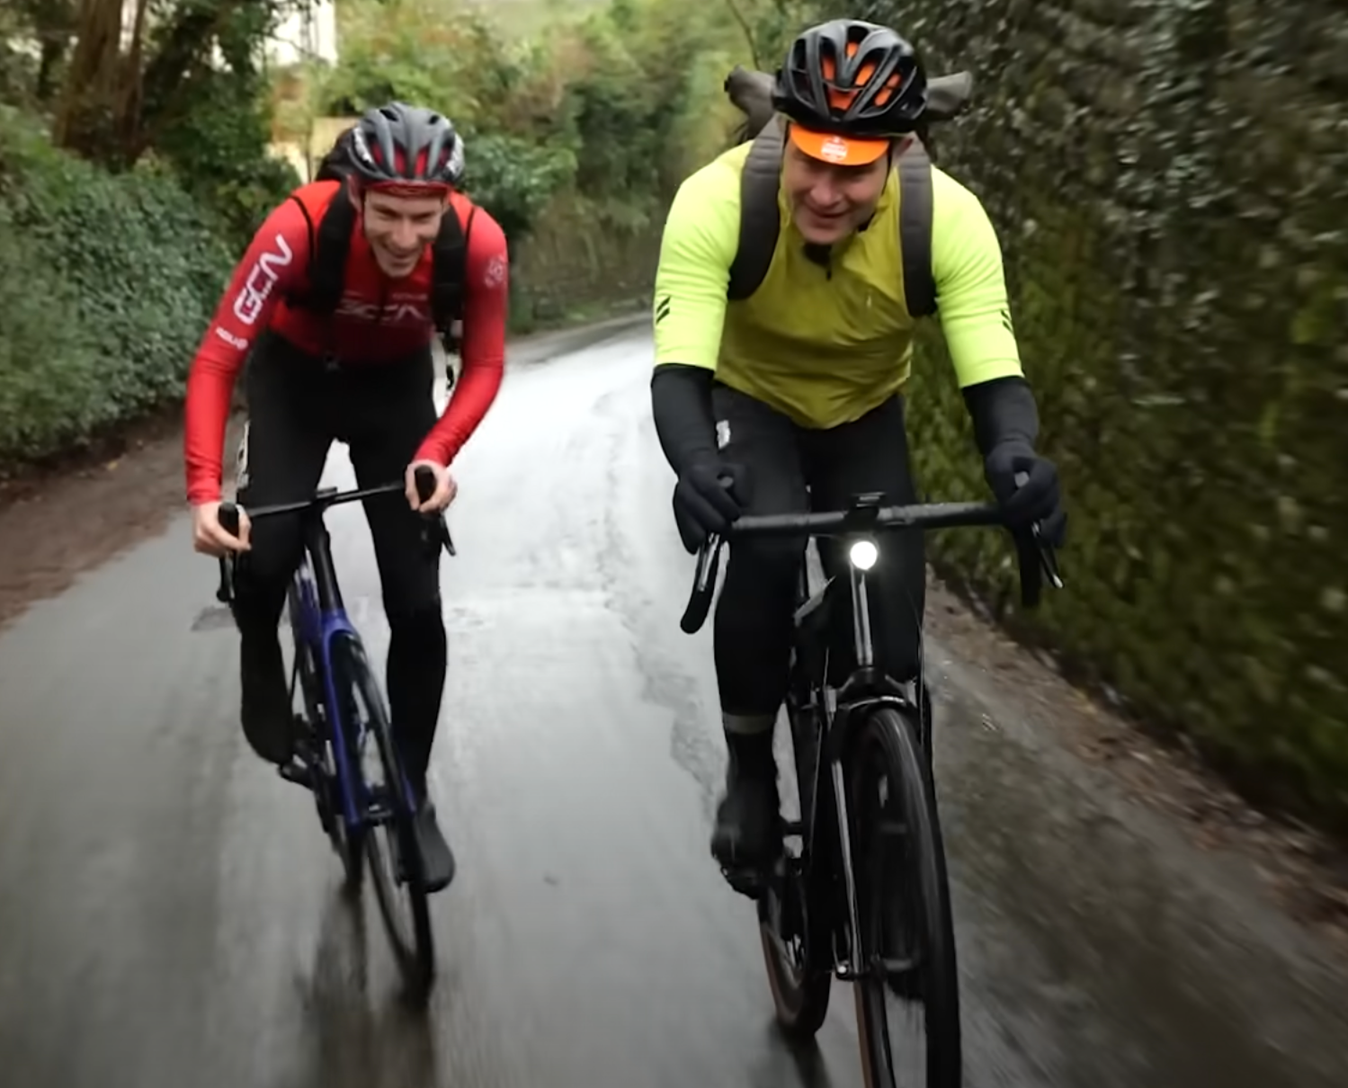 Commuting is great, and it can be even better with friends